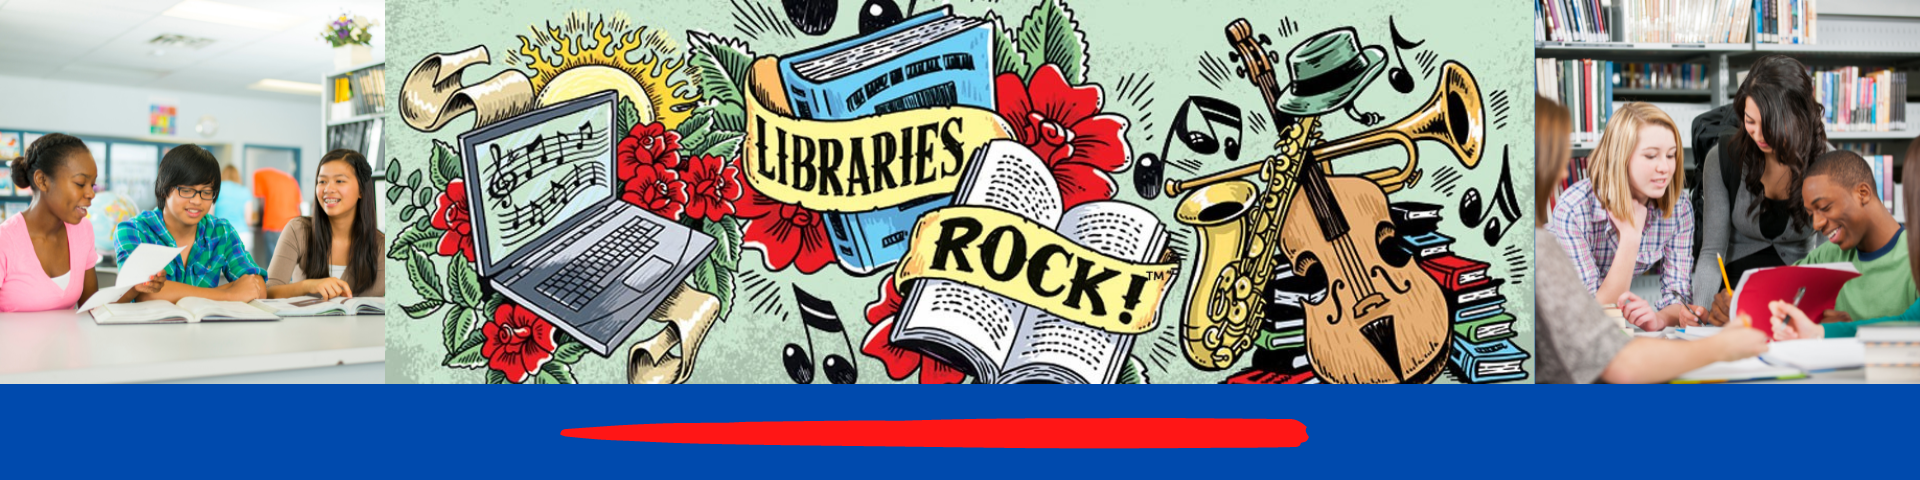 Libraries rock with books, saxaphone, bass, trumpet, music notes, laptop with music notes in tattoo style drawing icons